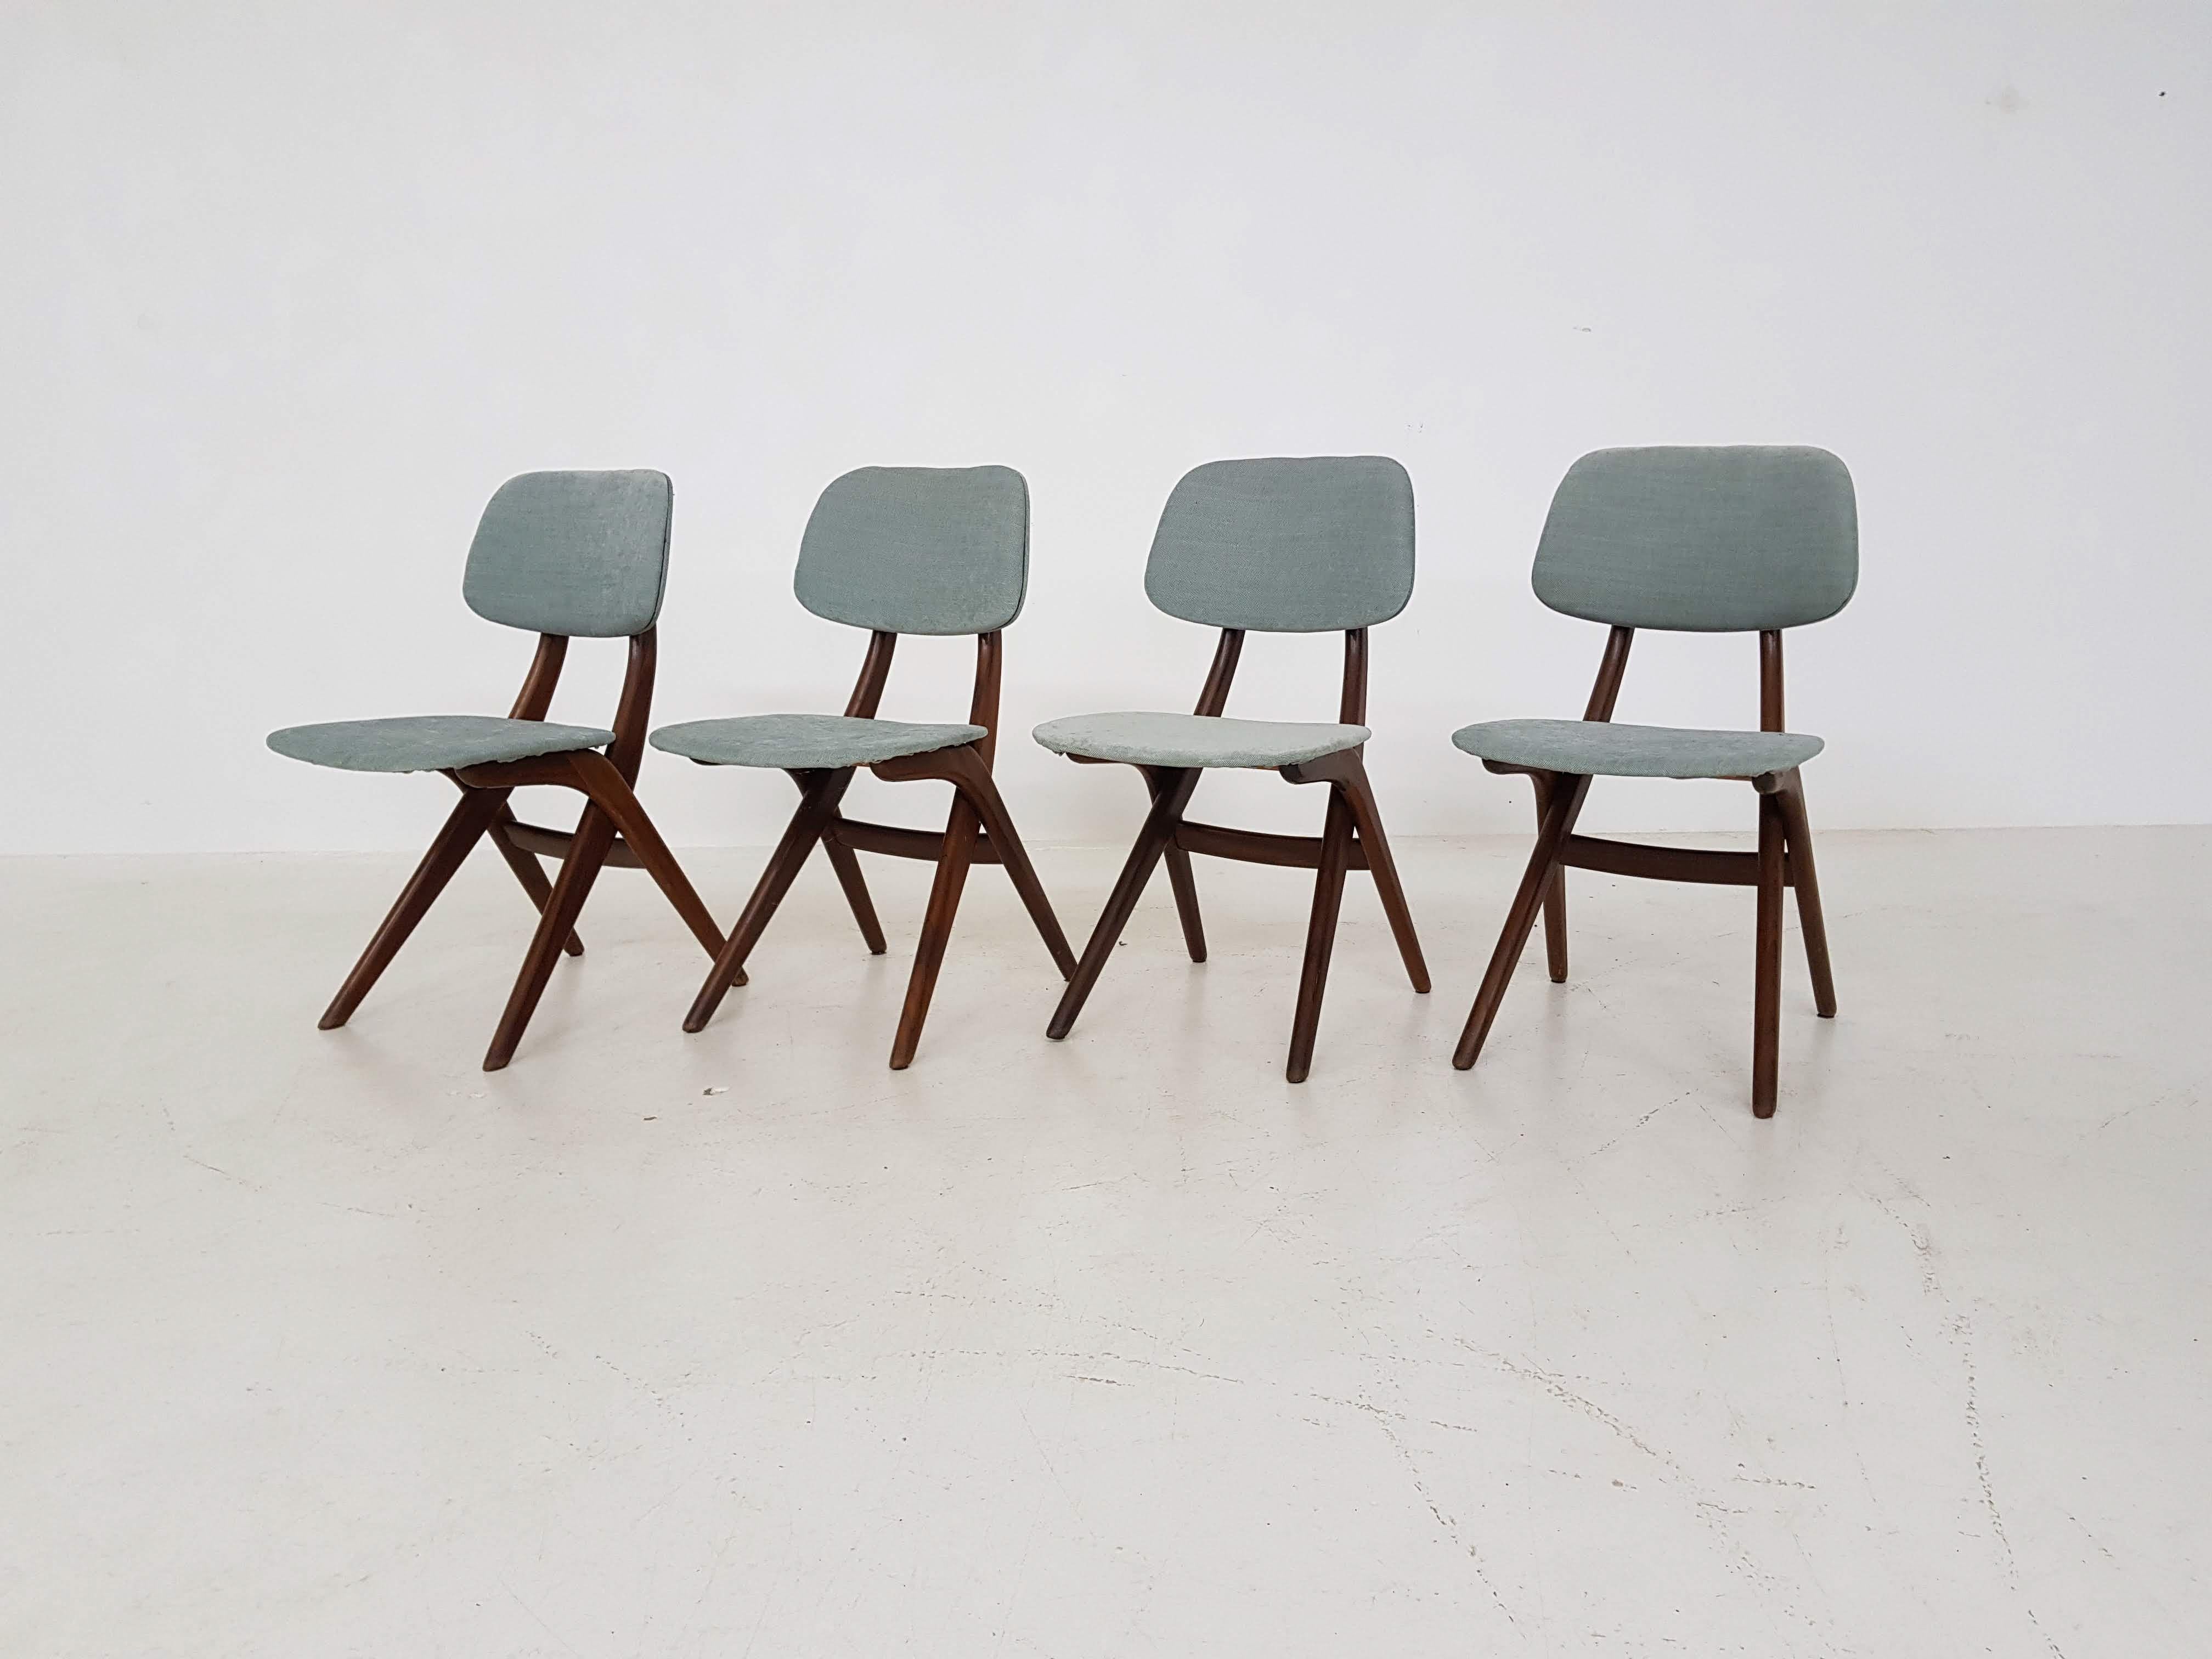 Set of 4 teak dining chairs by Louis Van Teeffelen for Wébé, Dutch design, 1950s.

These chairs are made by Wébé the Netherlands. Wébé was a Dutch furniture producer with Louis Van Teeffelen as their most famous designer. Van Teeffelen designed